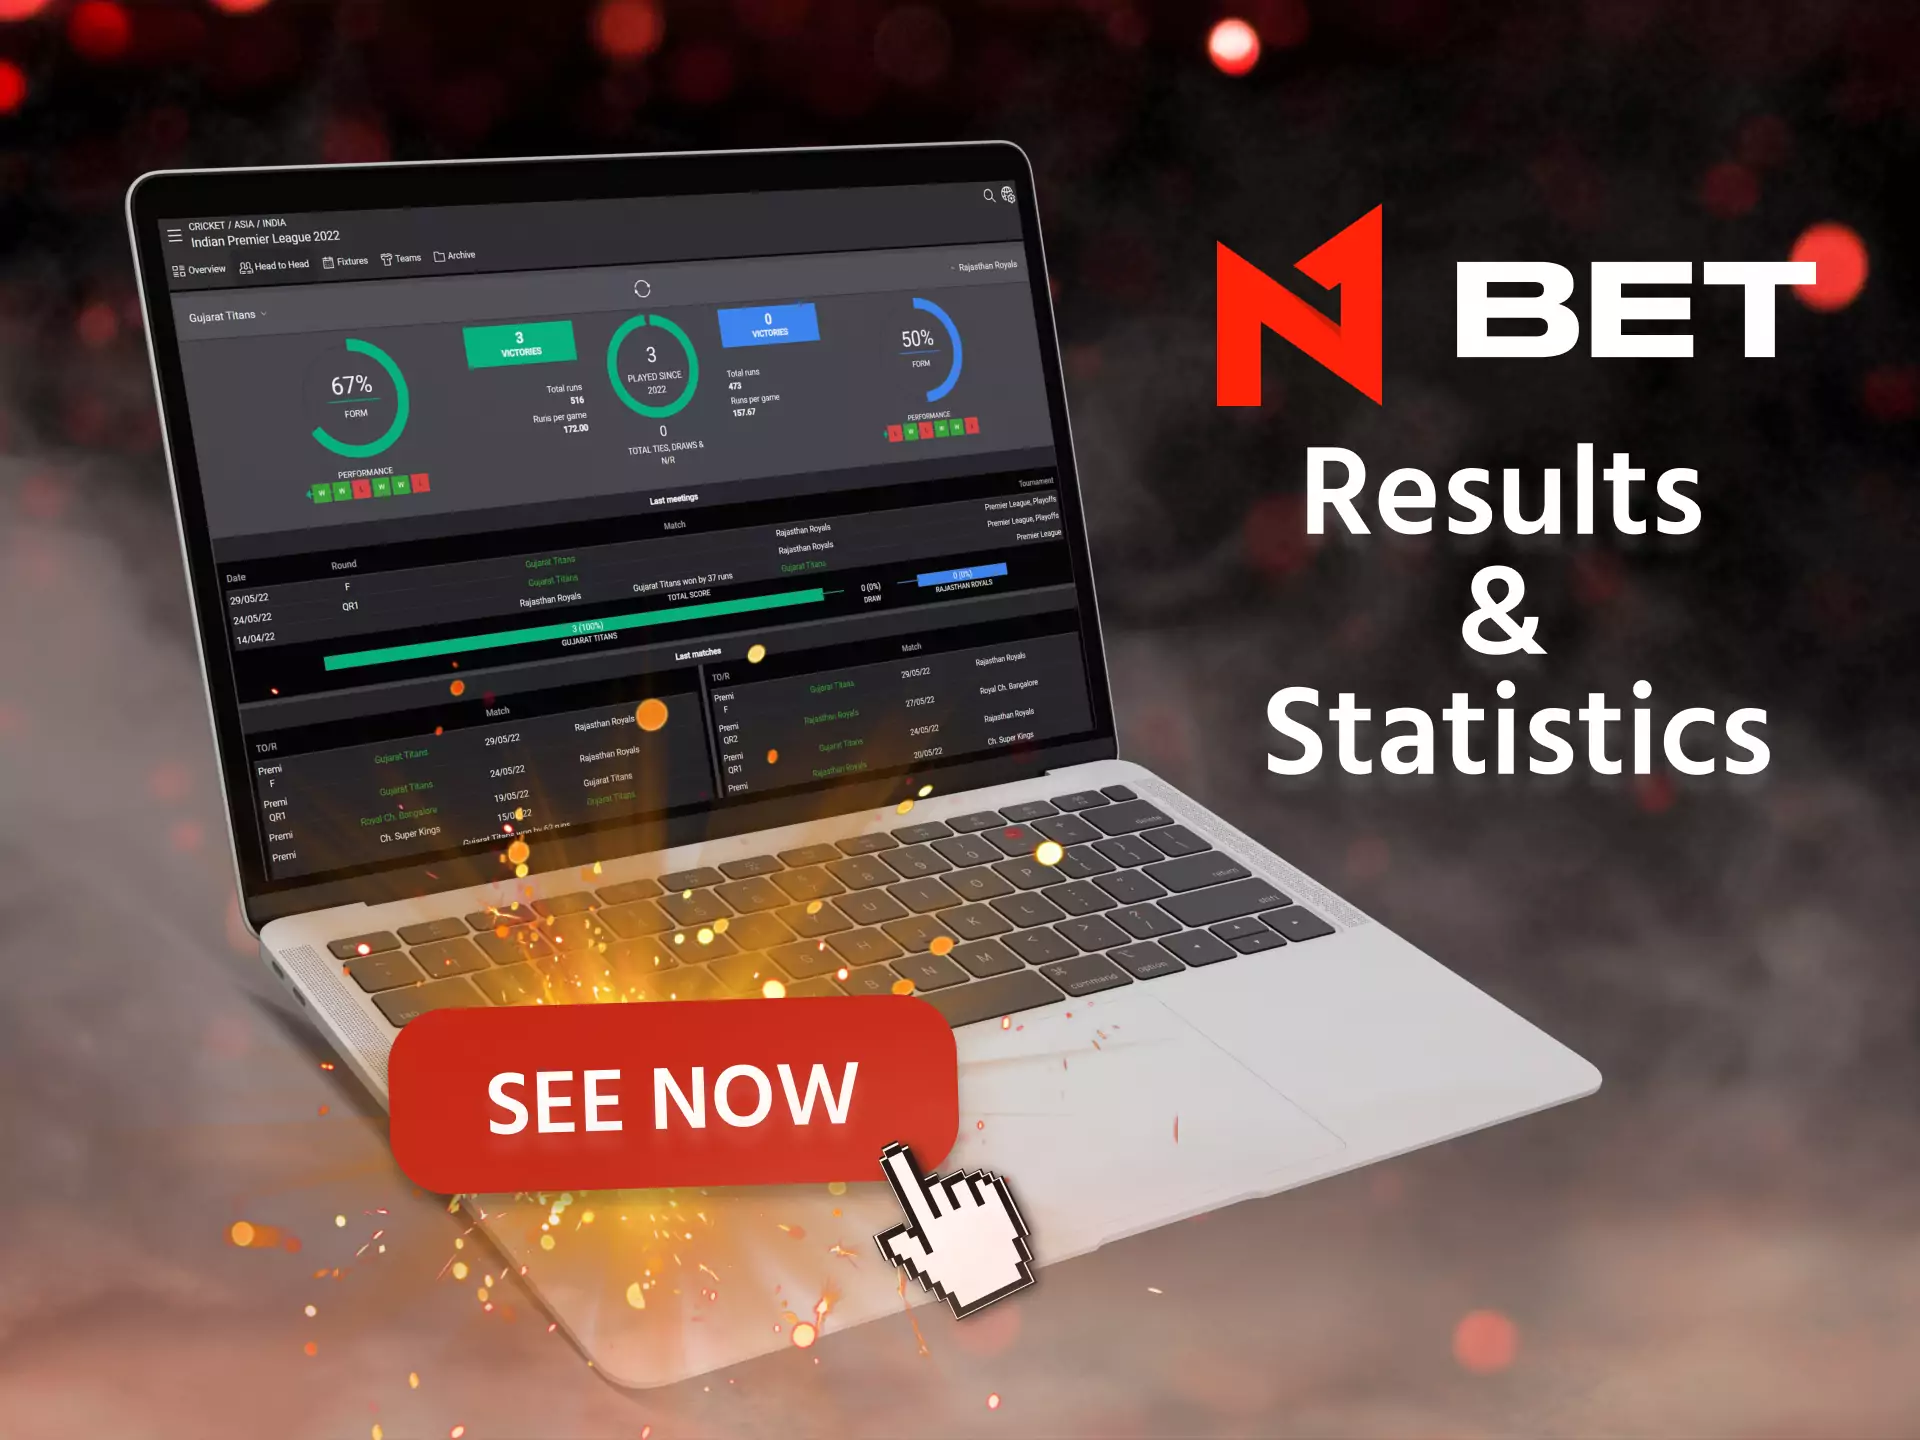 Check the results and see the statistics directly on the N1Bet website.